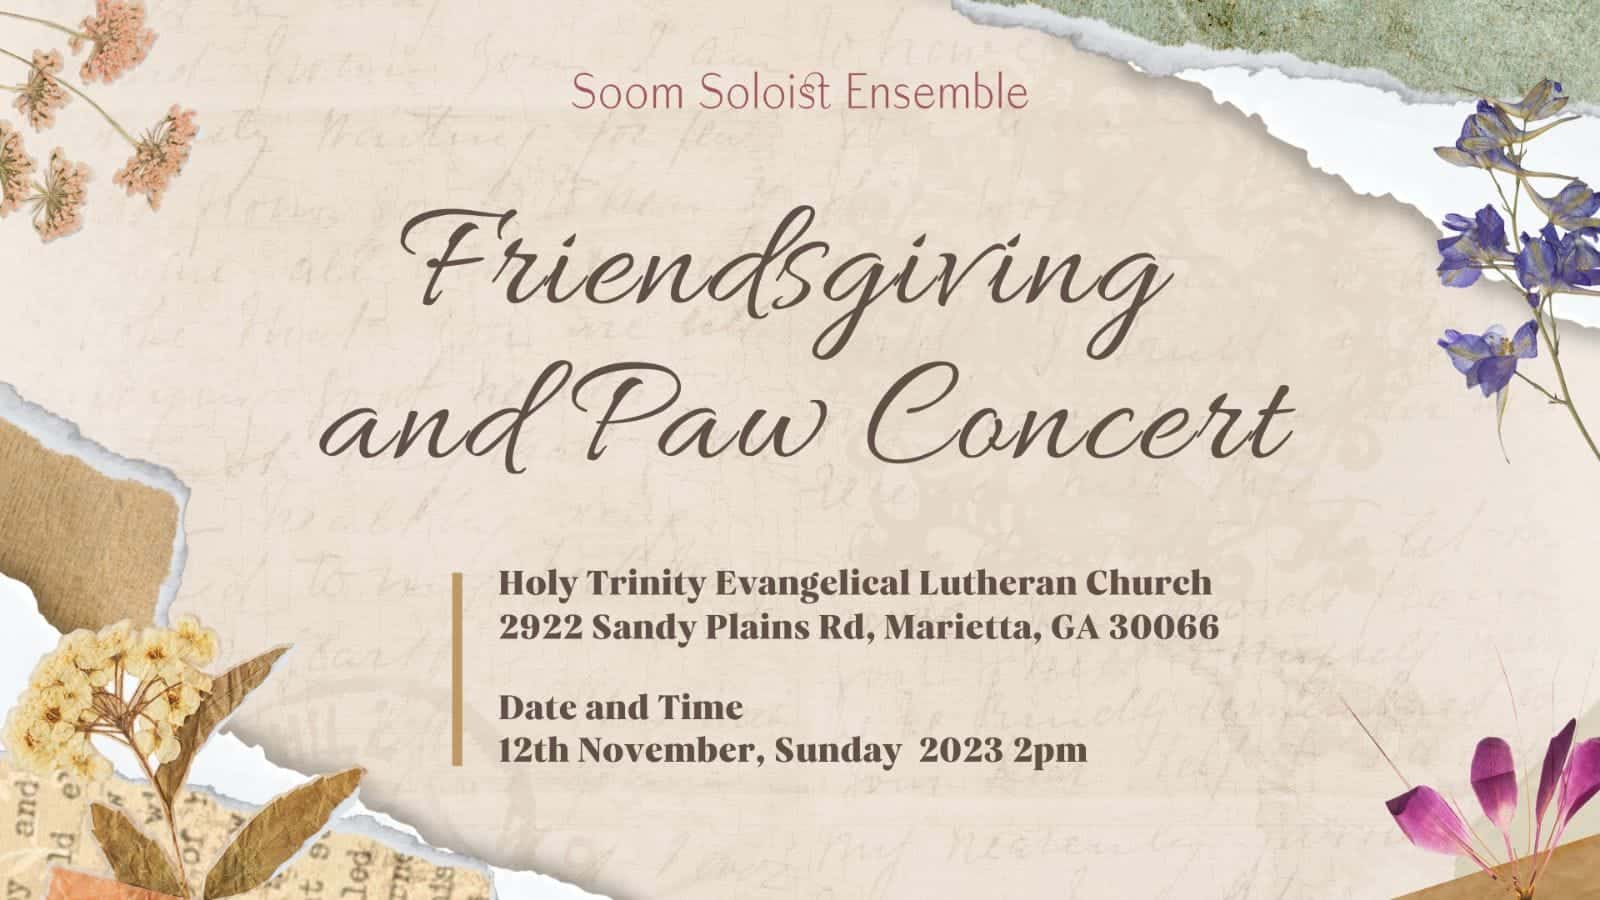 Friends Giving and Paw Concert